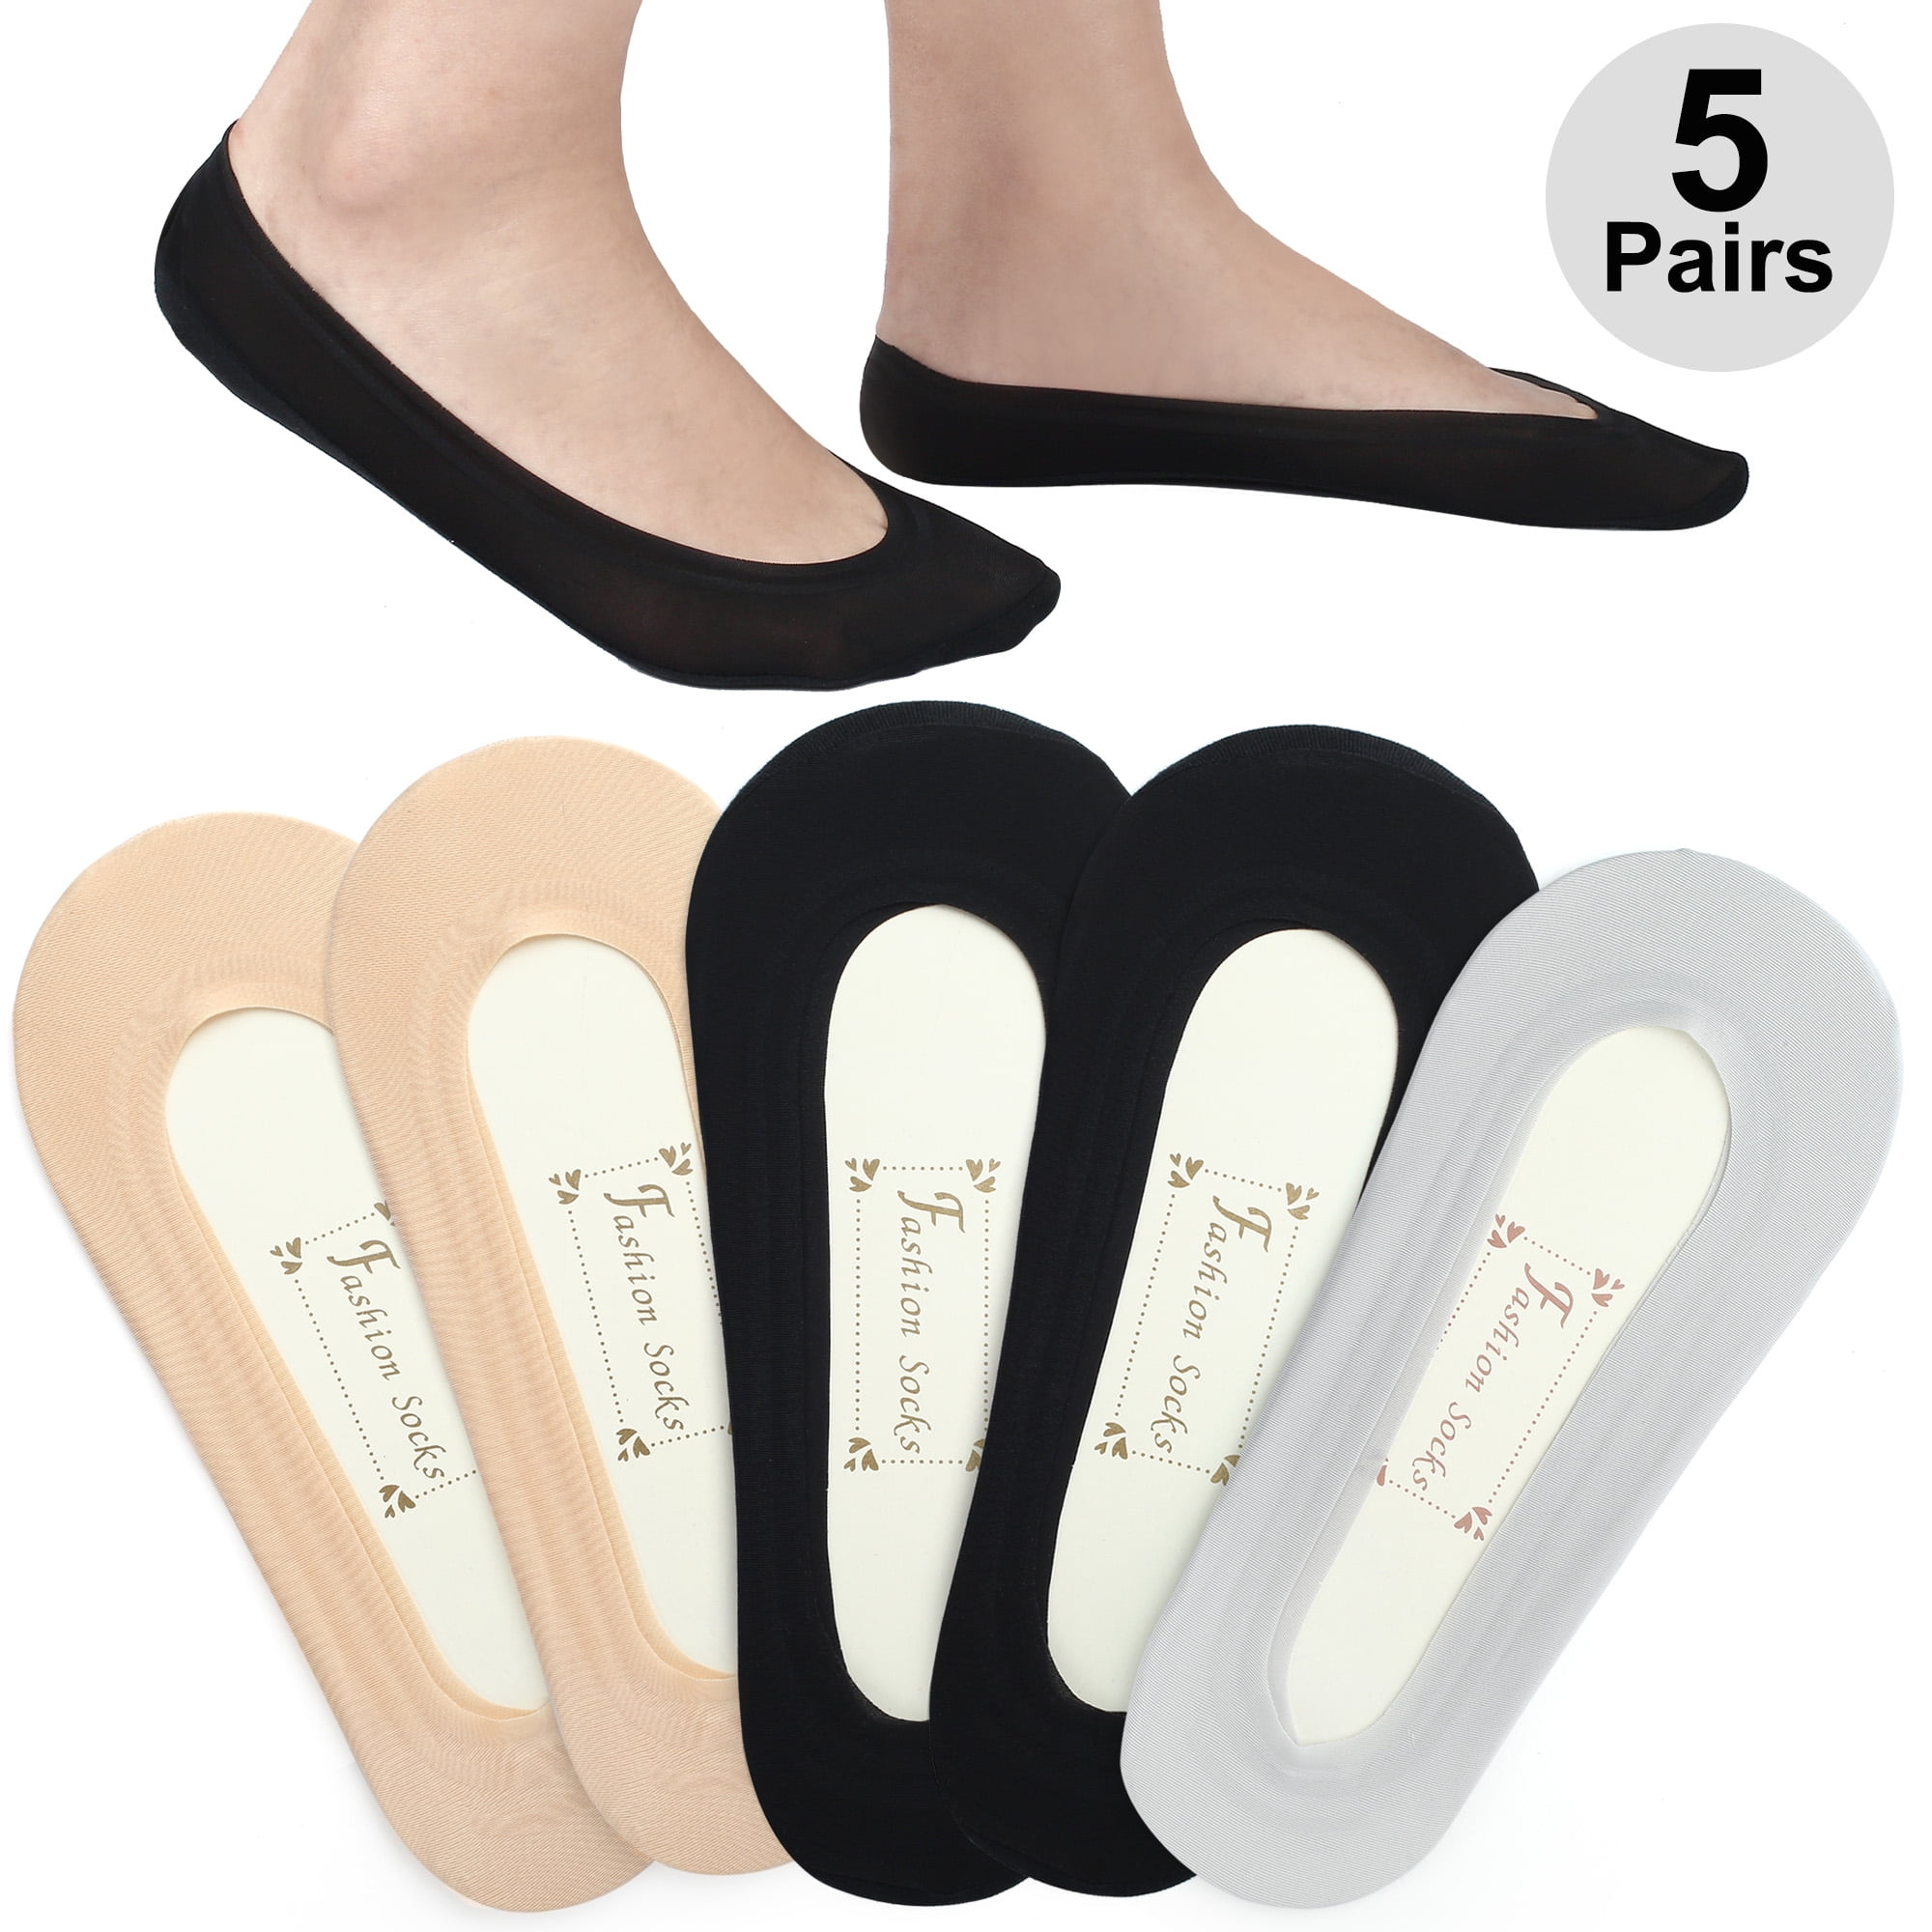 New 5 Pair Women's Invisible No Show Nonslip Loafer Boat Liner Socks Low Cut 